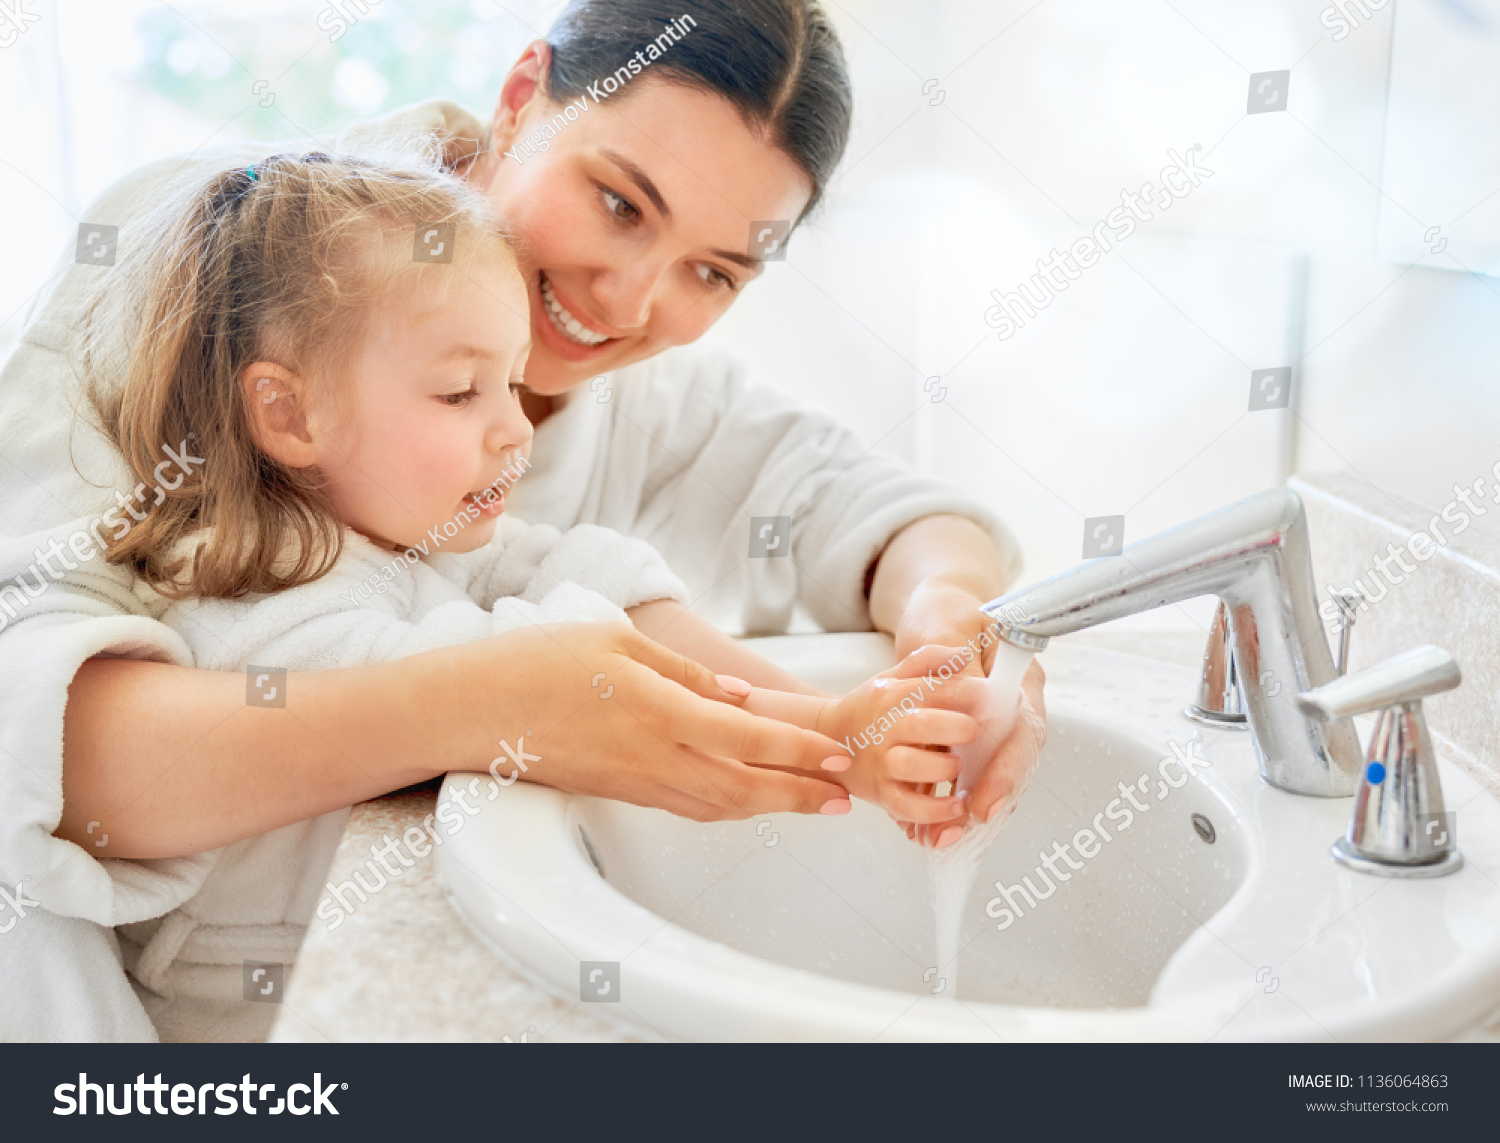 Cute little girl and her mother are washing hands under running water. #1136064863